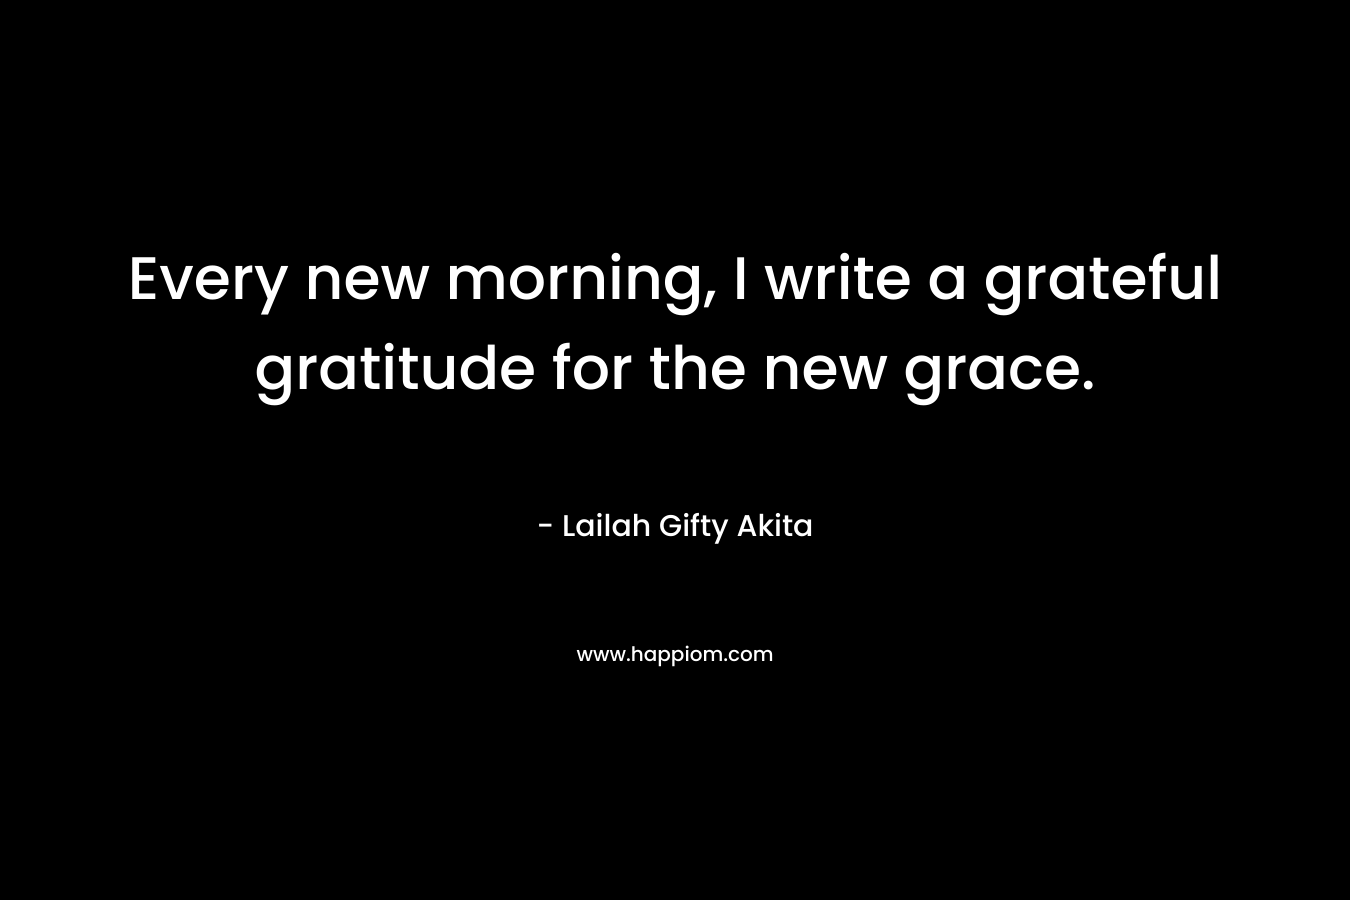 Every new morning, I write a grateful gratitude for the new grace.